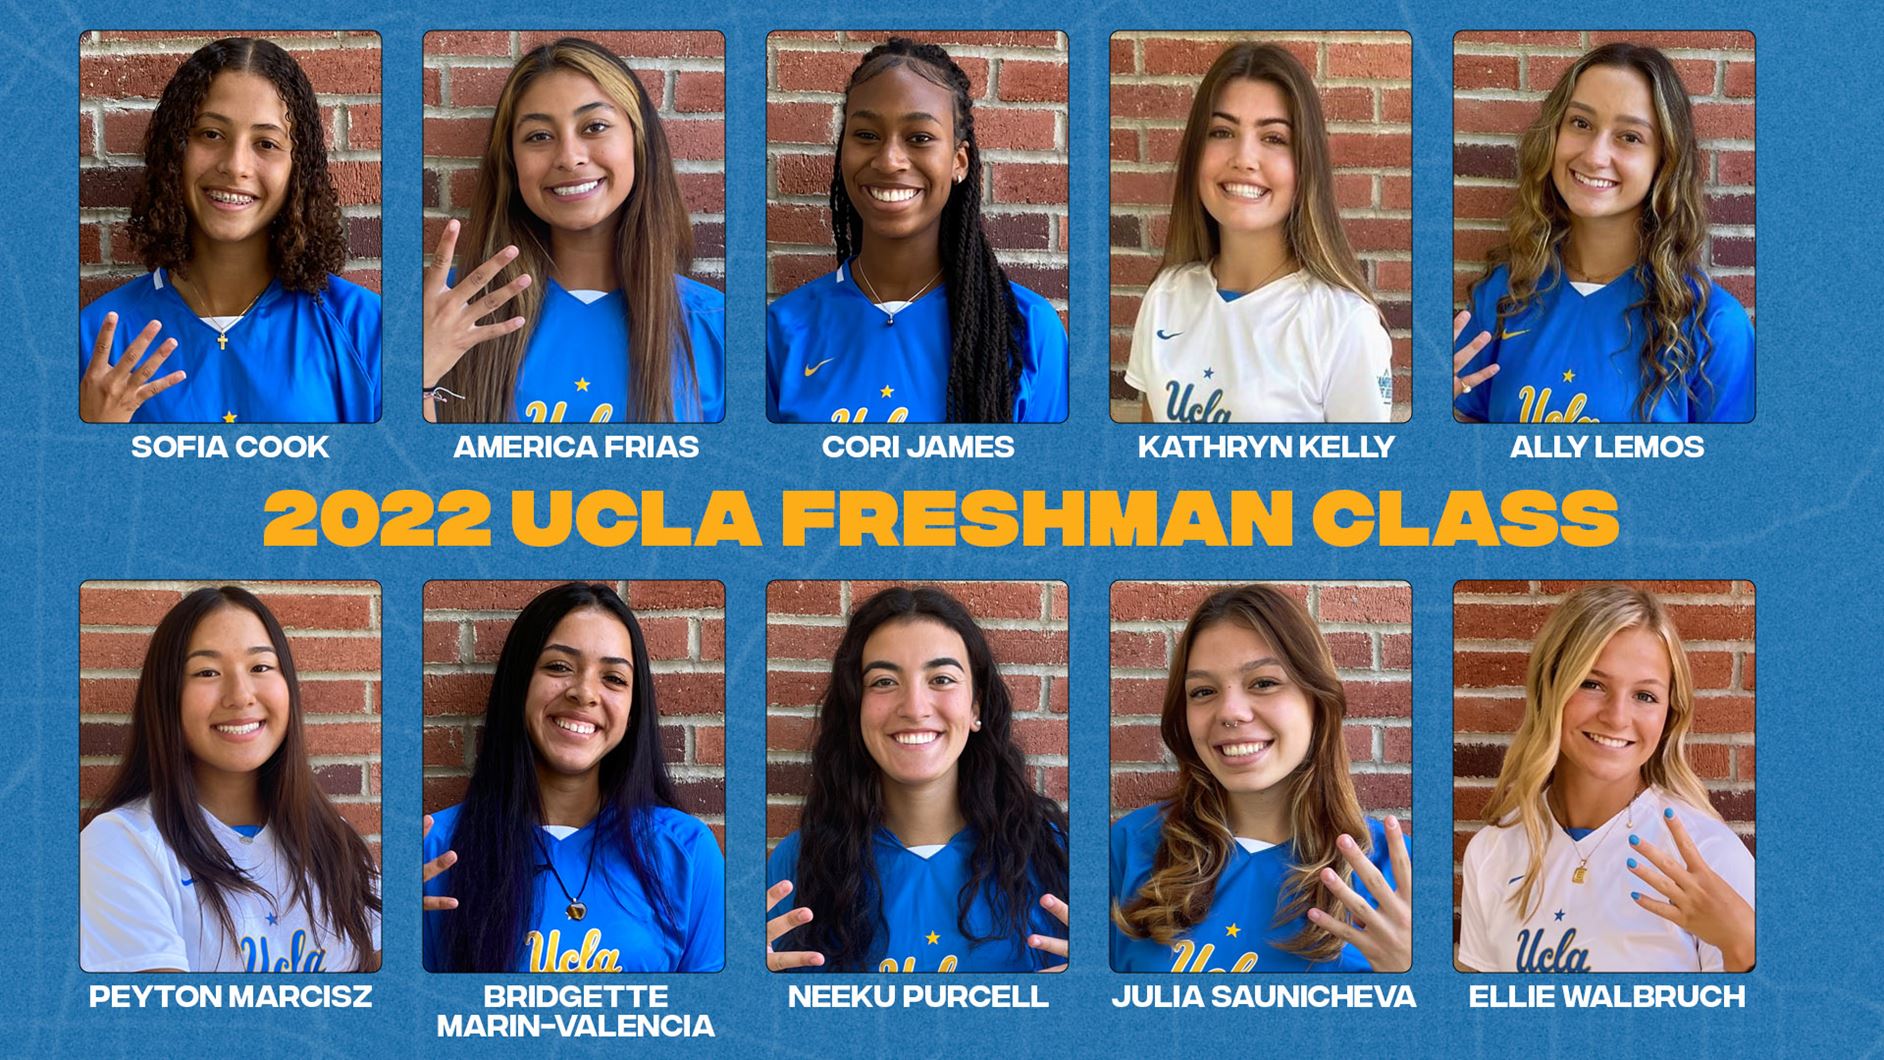 UCLA introduces No. 1 ranked women's soccer recruiting class for 2022